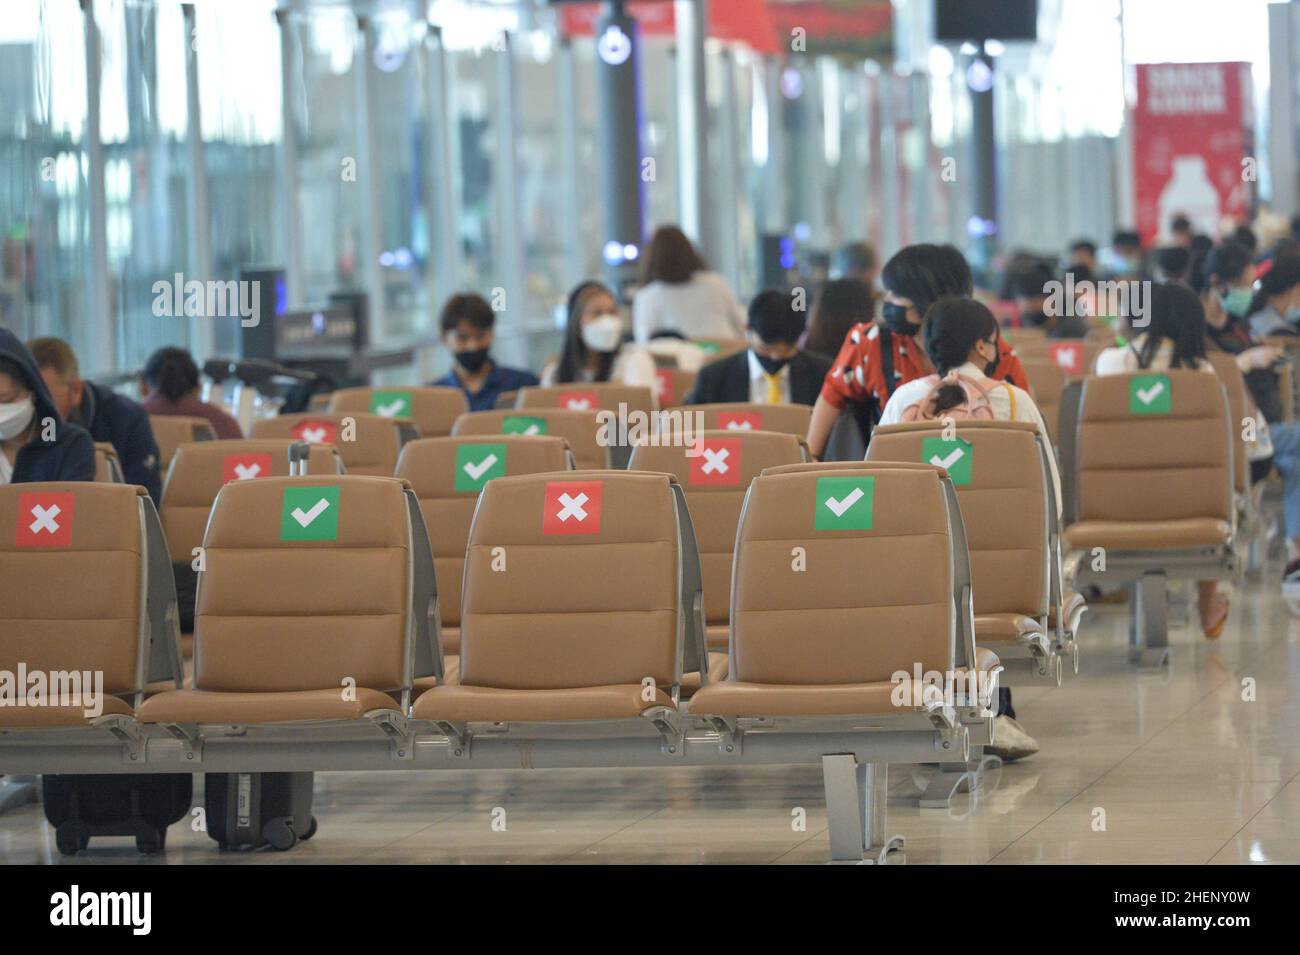 BANGKOK, Jan. 12, 2022 (Xinhua) -- Travellers are seen at the Suvarnabhumi International Airport in Bangkok, Thailand, Jan. 11, 2022. Due to concerns about a new wave of COVID-19 outbreak, Thailand halted the quarantine-free travel scheme from Dec. 22, 2021 and most of its Sandbox Program, which enables quarantine-free entry while requiring visitors to stay in a specific destination for seven days with free movement during their stay, except for the resort island of Phuket. According to the Center for COVID-19 Situation Administration, from Jan. 11 onwards, Thailand will allow qu Stock Photo